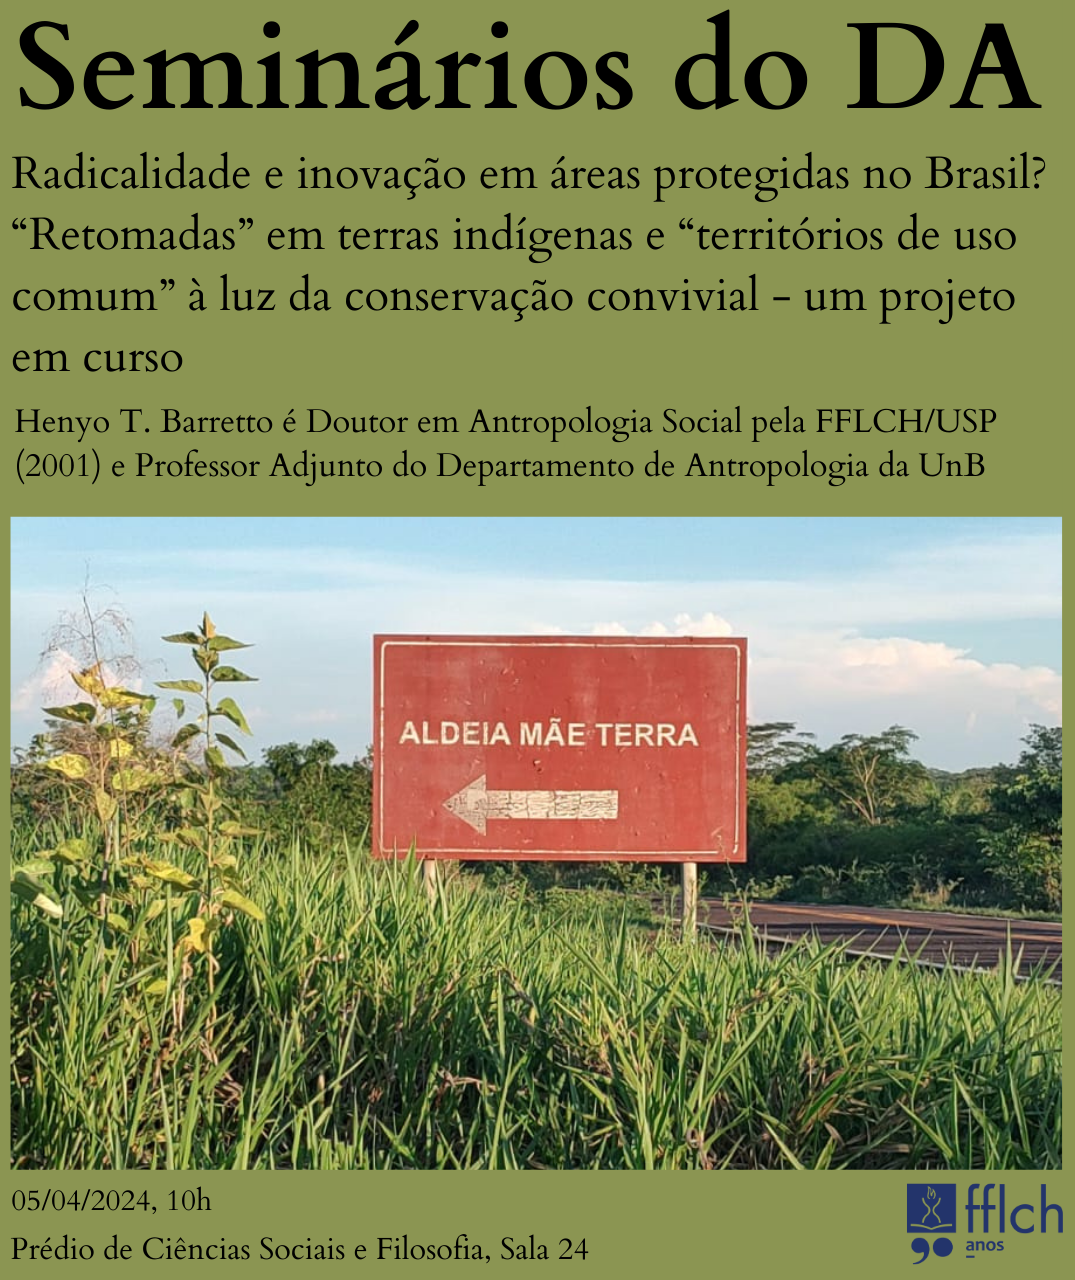 DA Seminars - Radicality and innovation in protected areas in Brazil? “Resumptions” of indigenous lands and “territories of common use” in the light of convivial conservation - an ongoing project